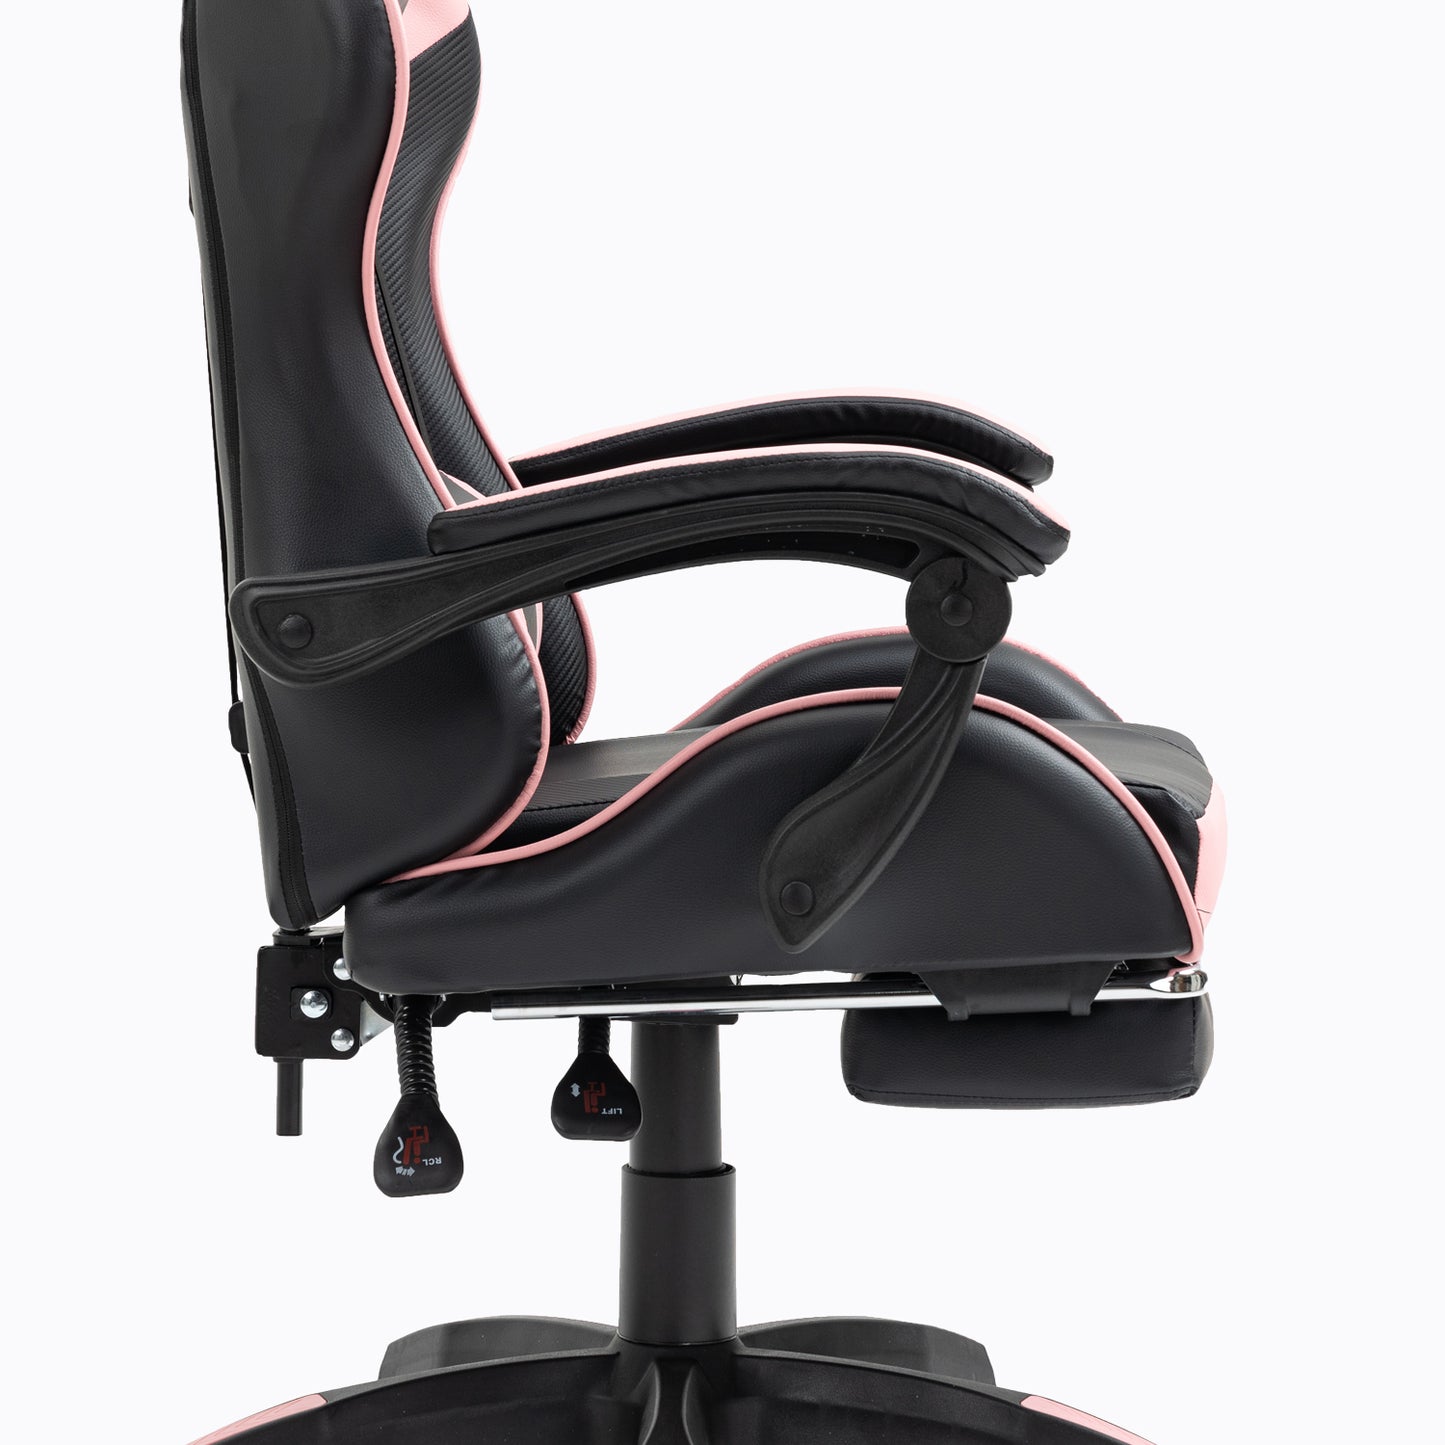 X1 Gaming Chair, Reclining PU Leather Computer Chair with 360 Degree Swivel Seat, Footrest, Removable Headrest and Lumber Support